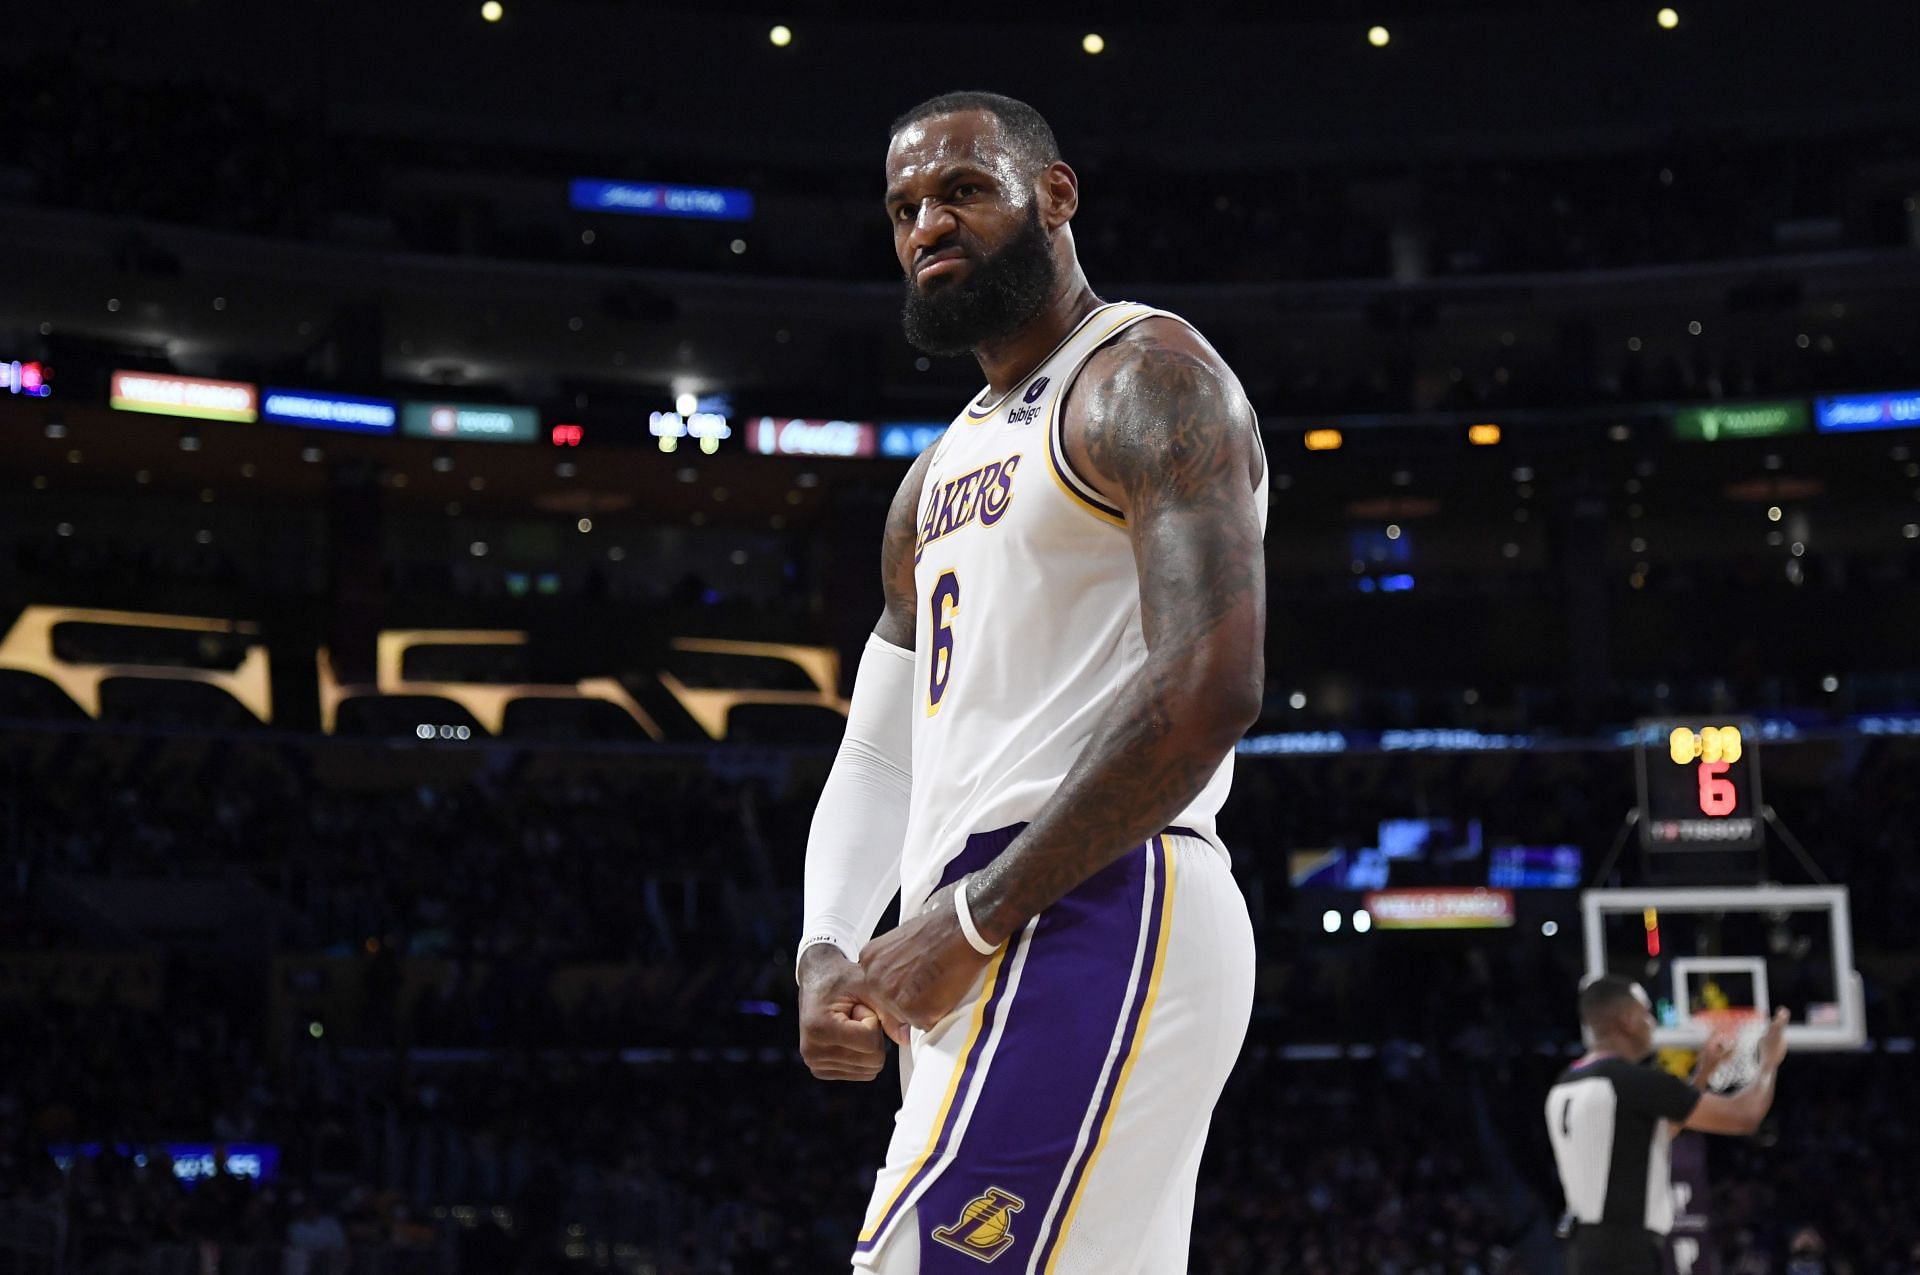 LeBron James in action during the Orlando Magic vs Los Angeles Lakers game